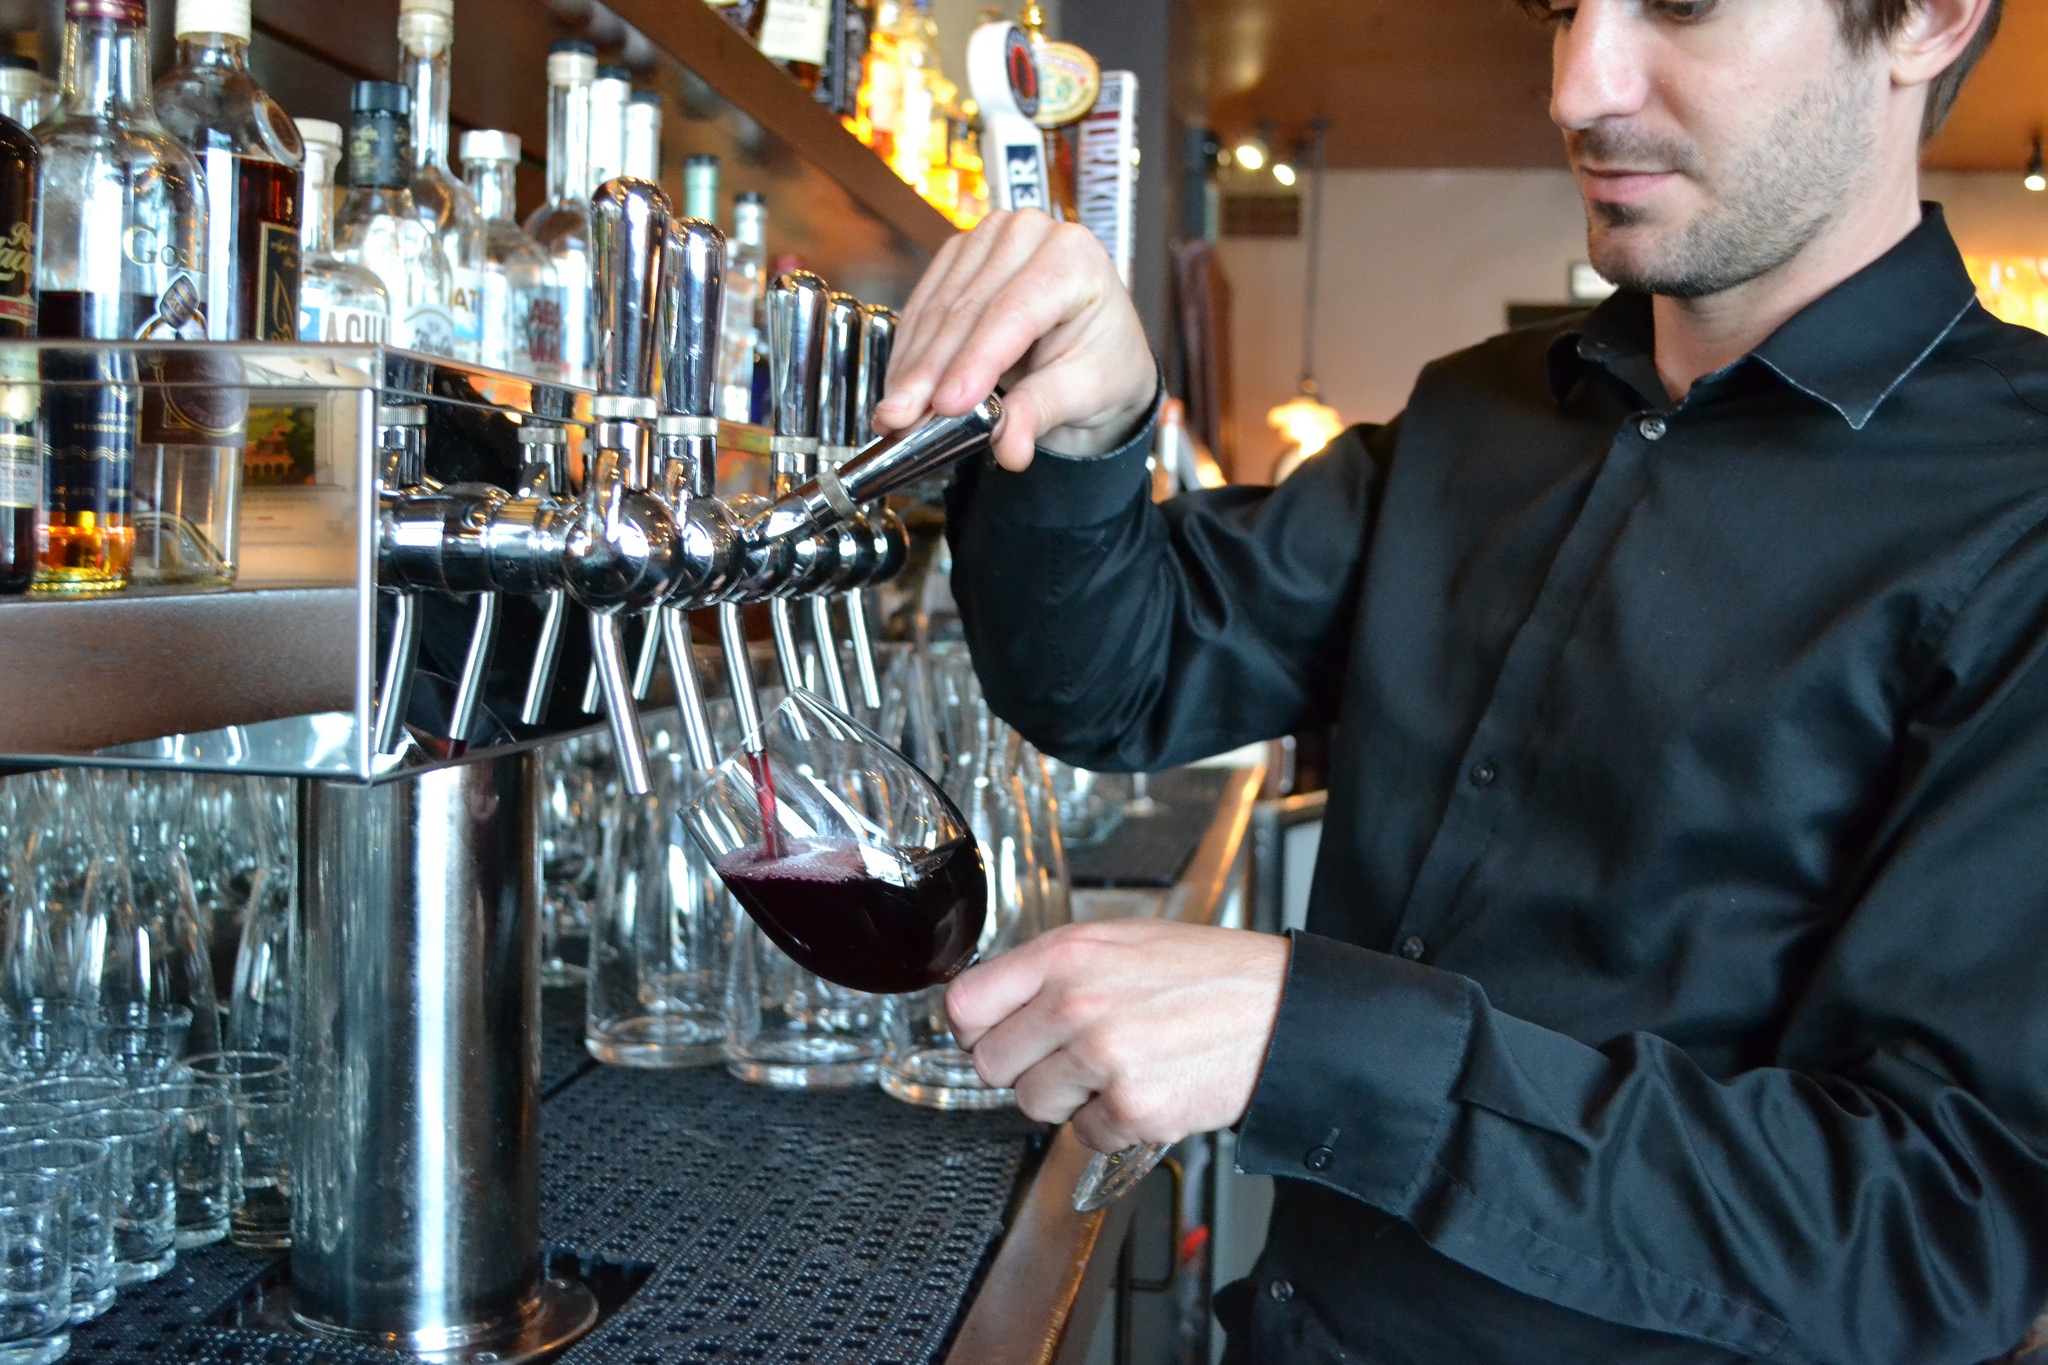 TAP'D Draft Solutions' innovative draft products go beyond beer and wine to enable spirits, coffee and more on-tap.